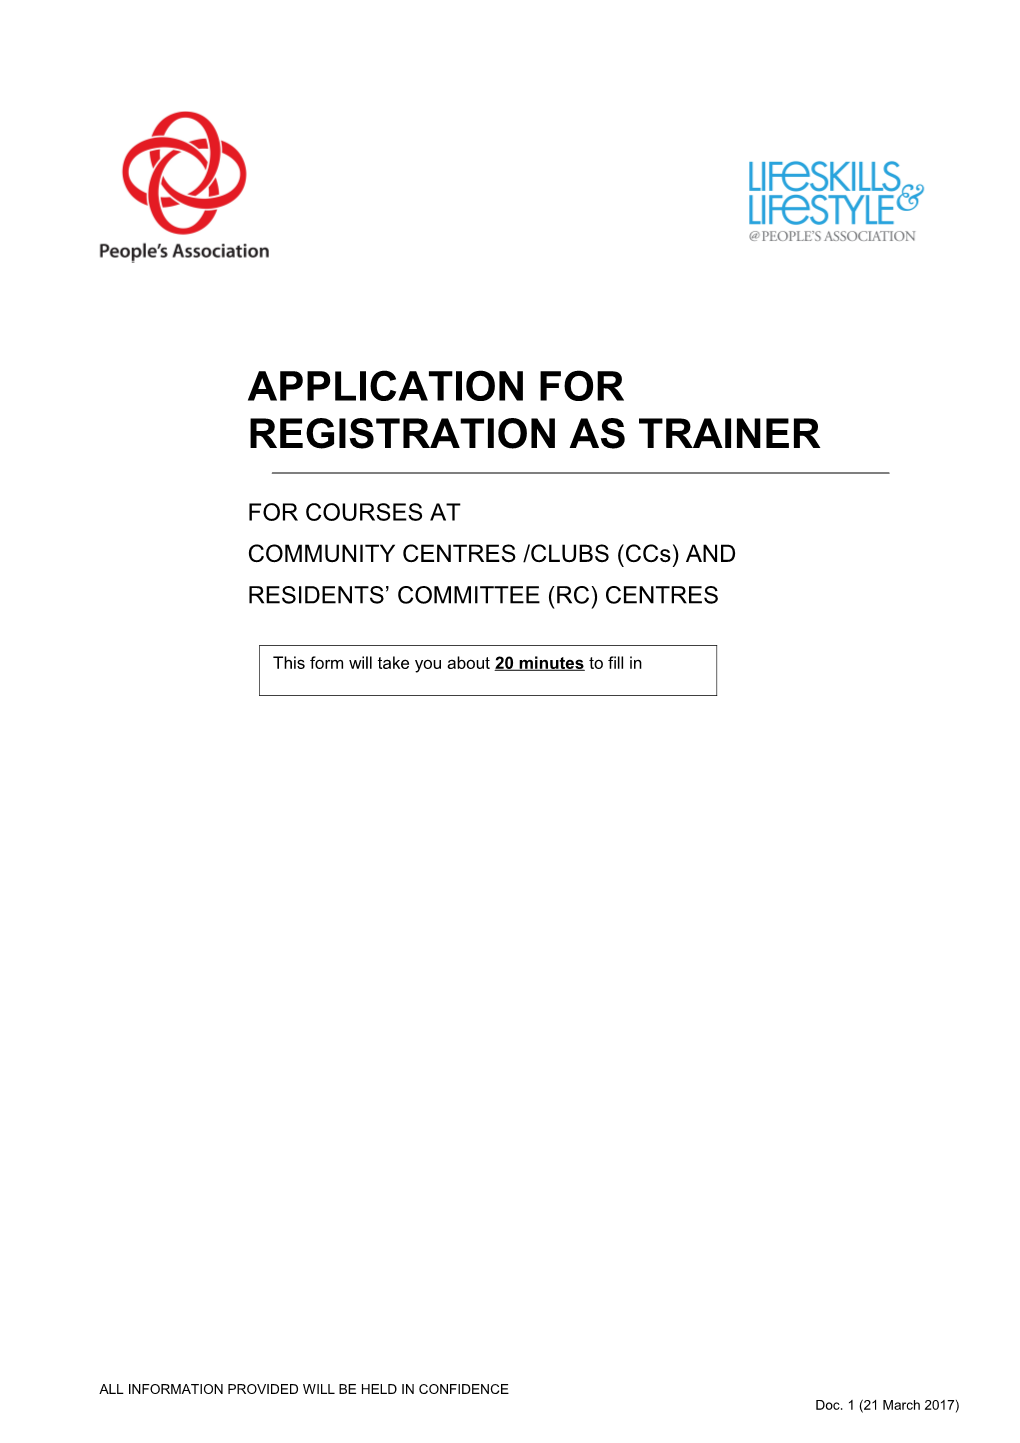 Application for Registration As a Trainer